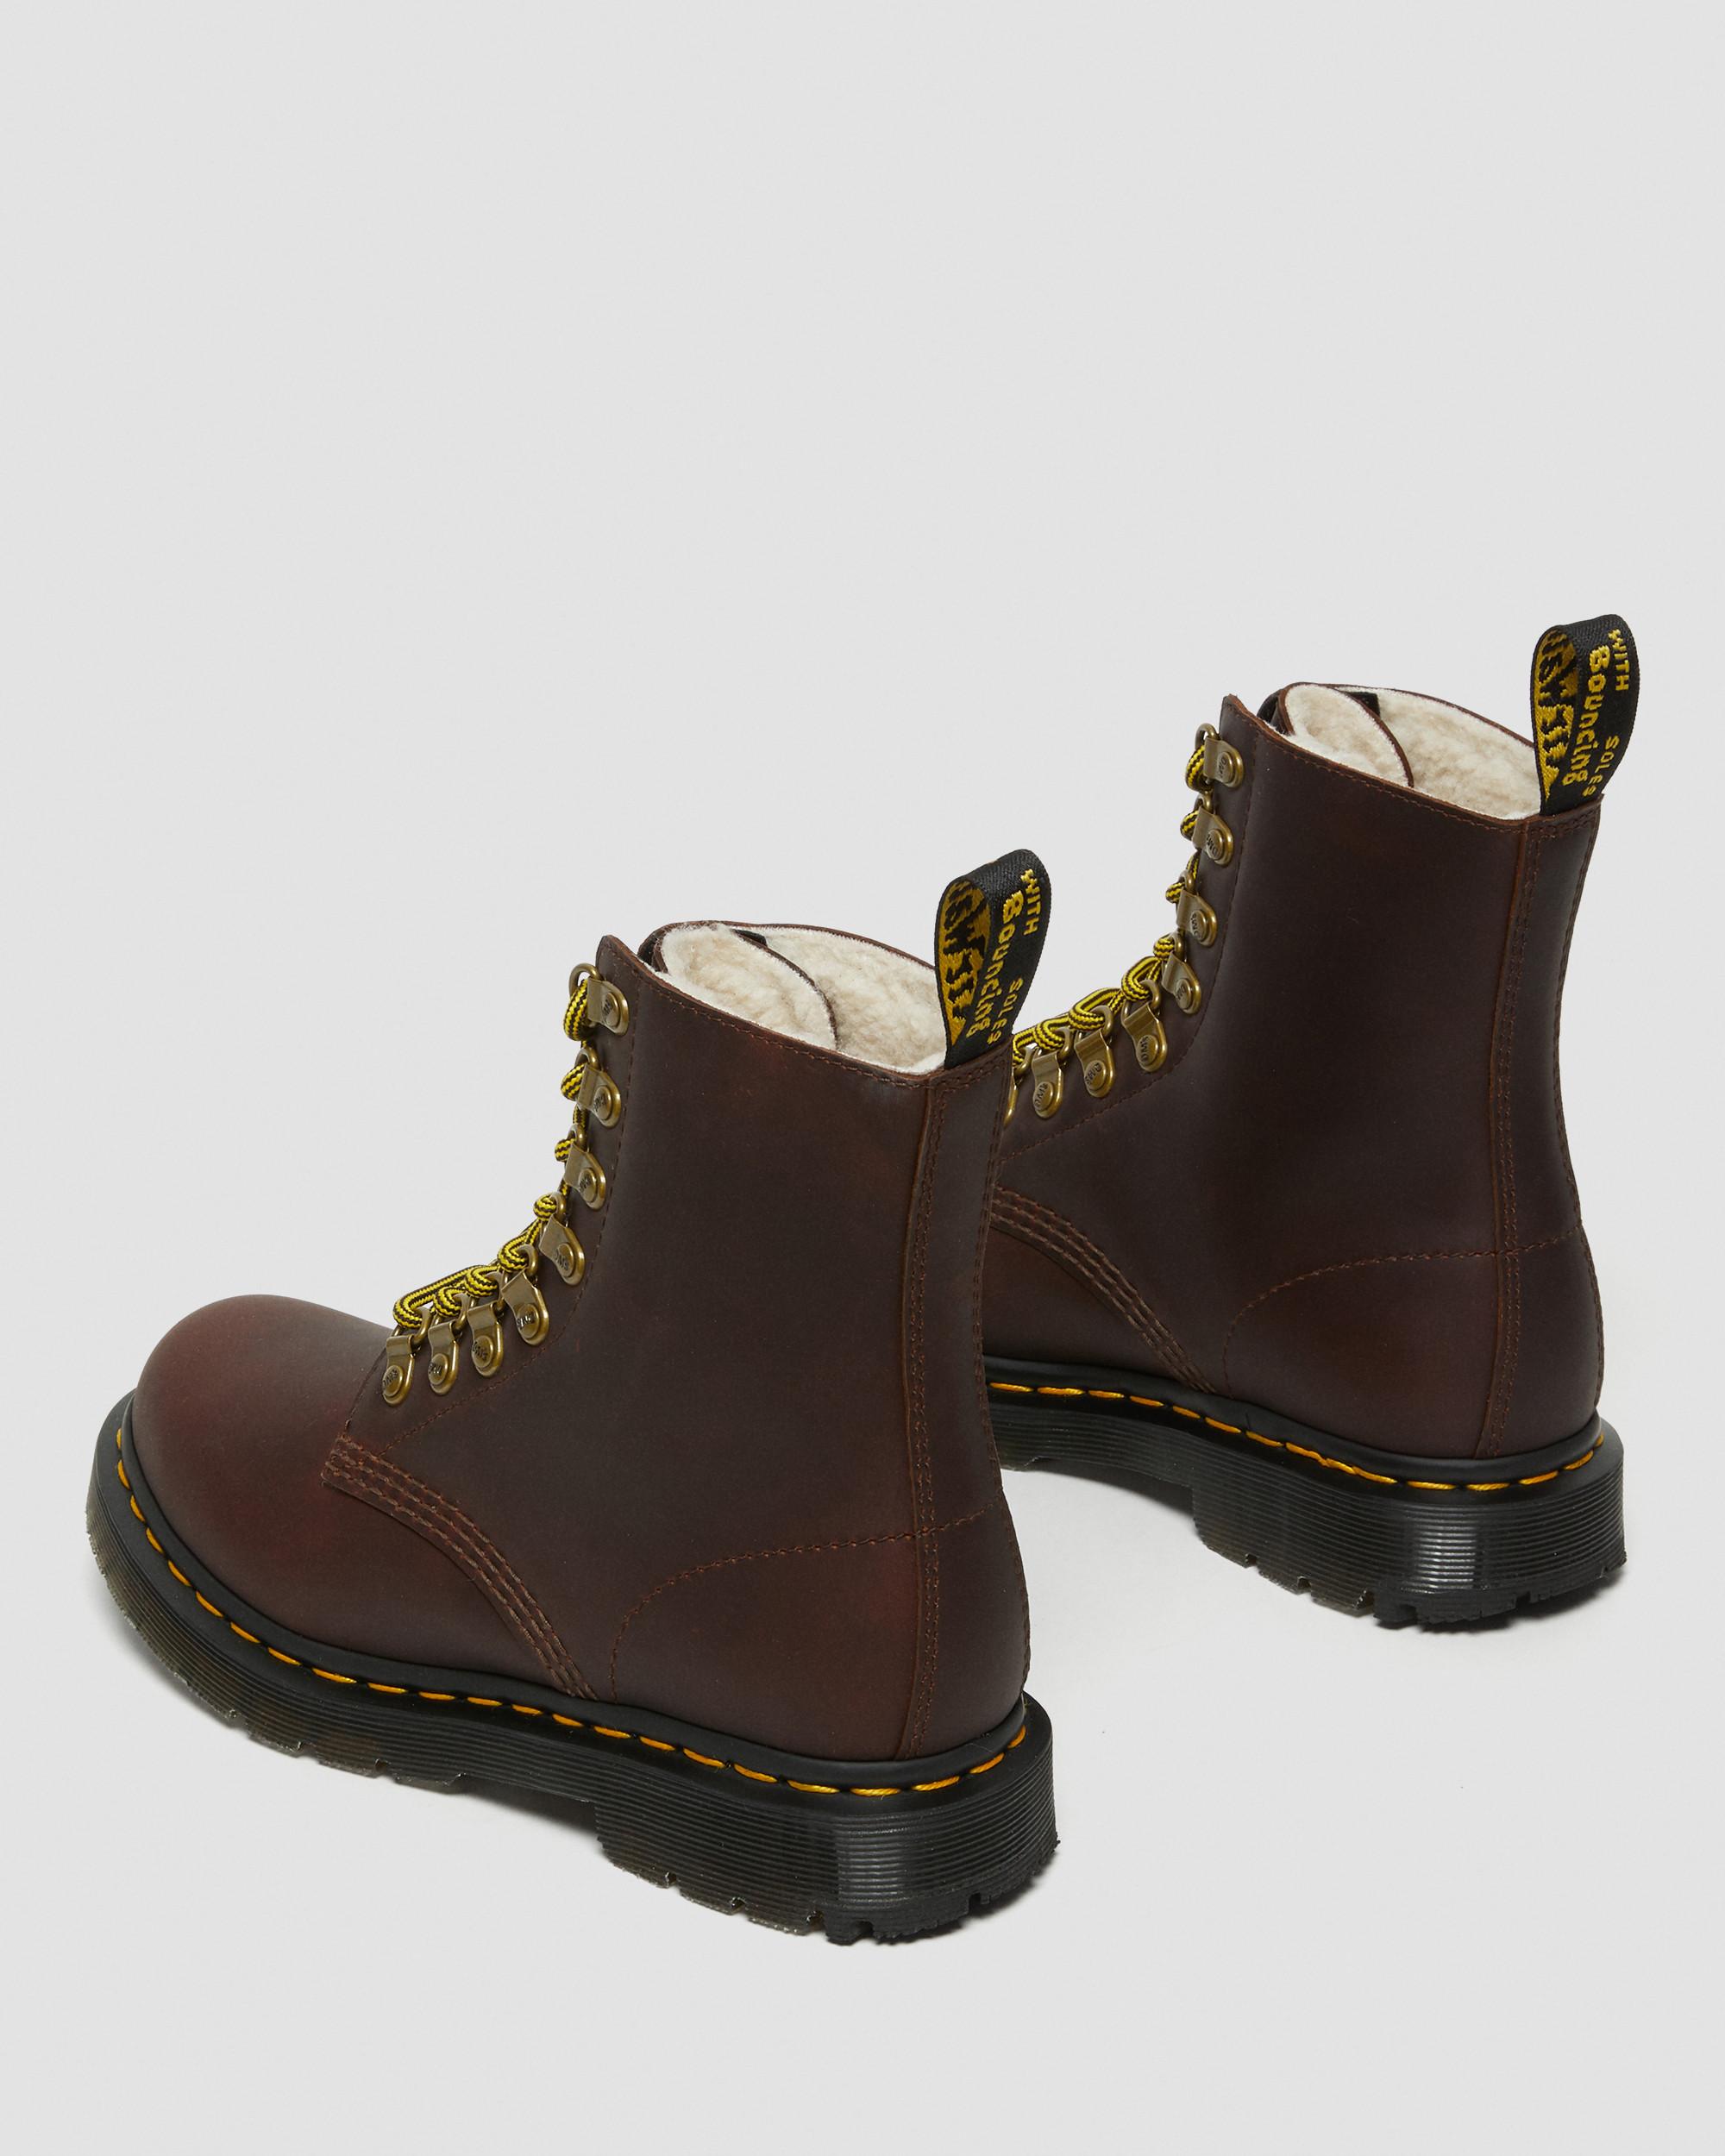 1460 PascalDM's Wintergrip Leather Ankle Boots in Brown | Dr. Martens